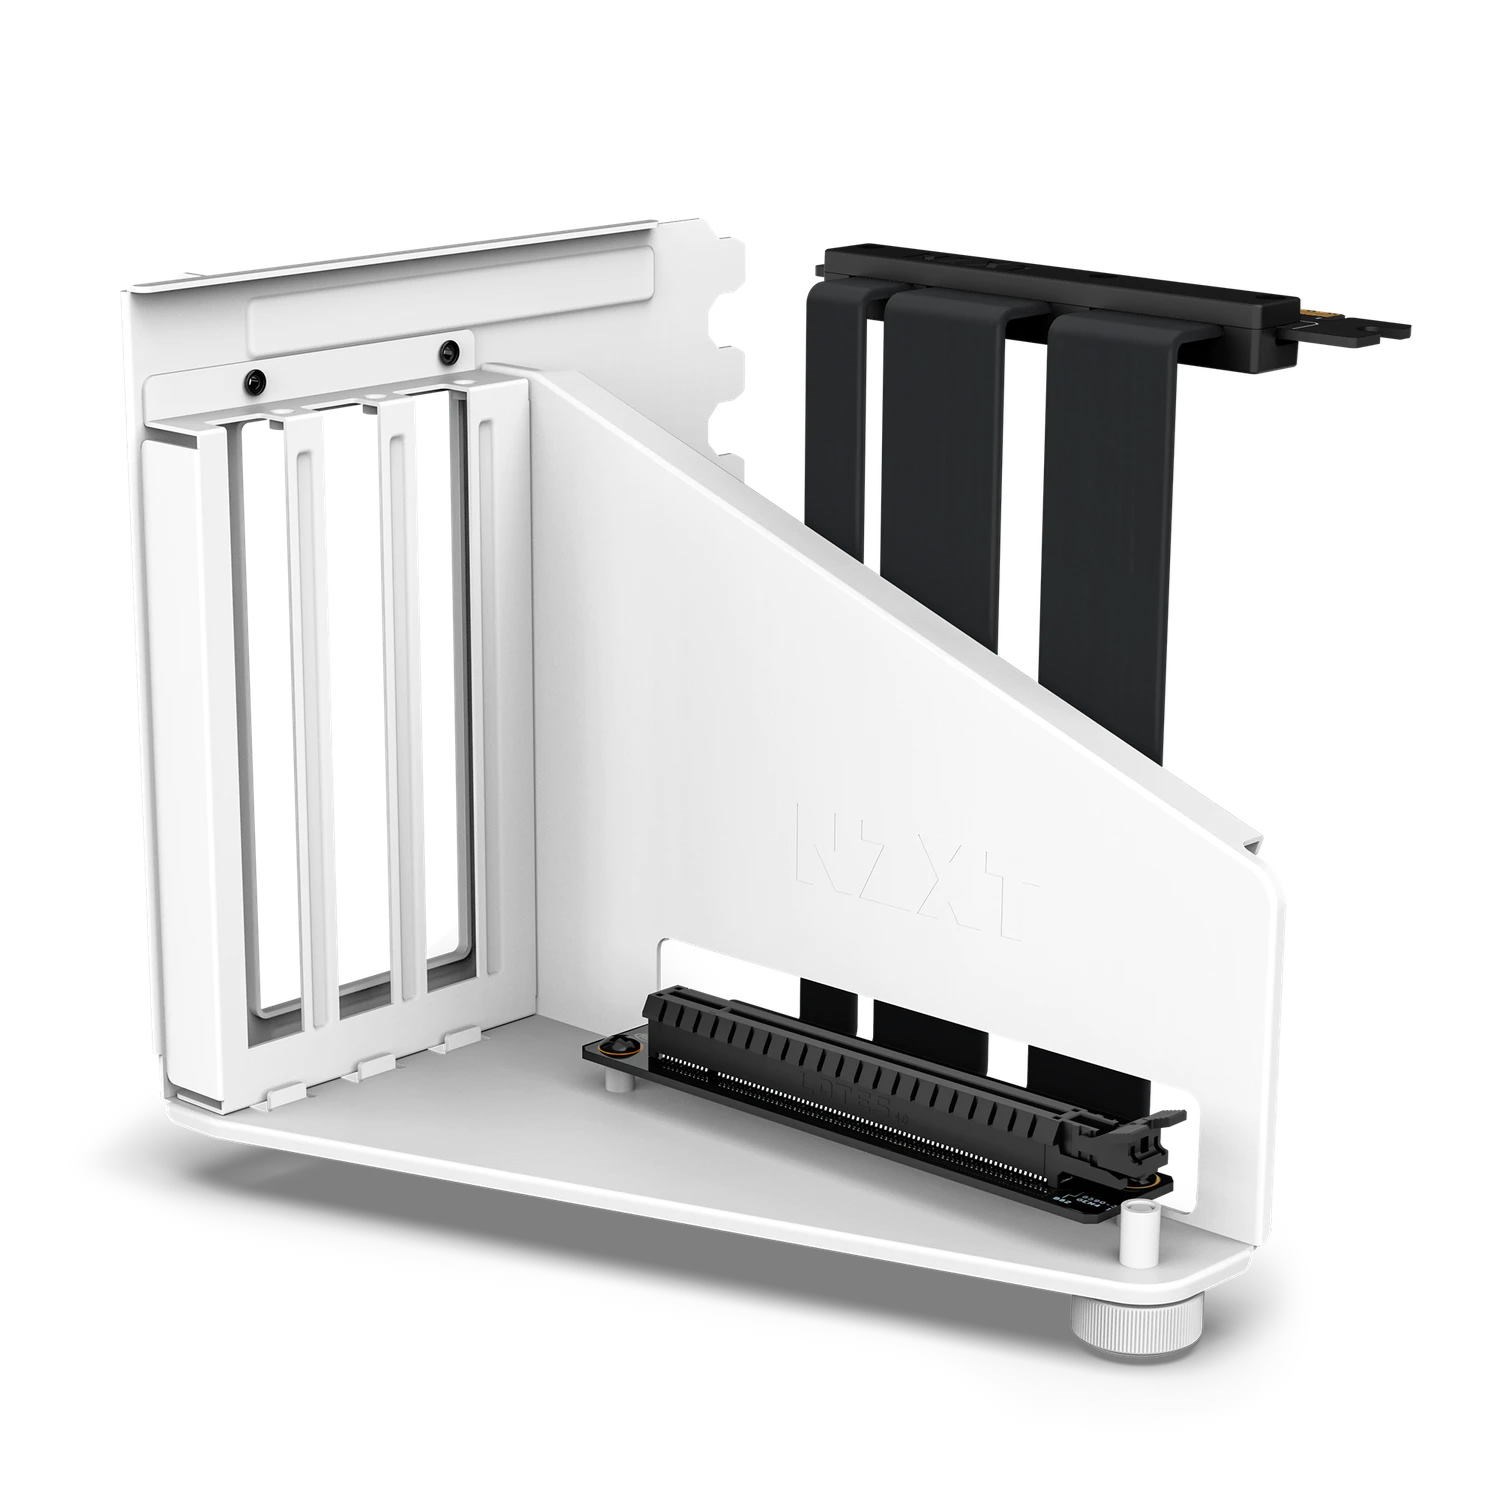 Photos - Other for Computer NZXT Vertical GPU Mounting Kit in Matte White AB-RH175-W1 